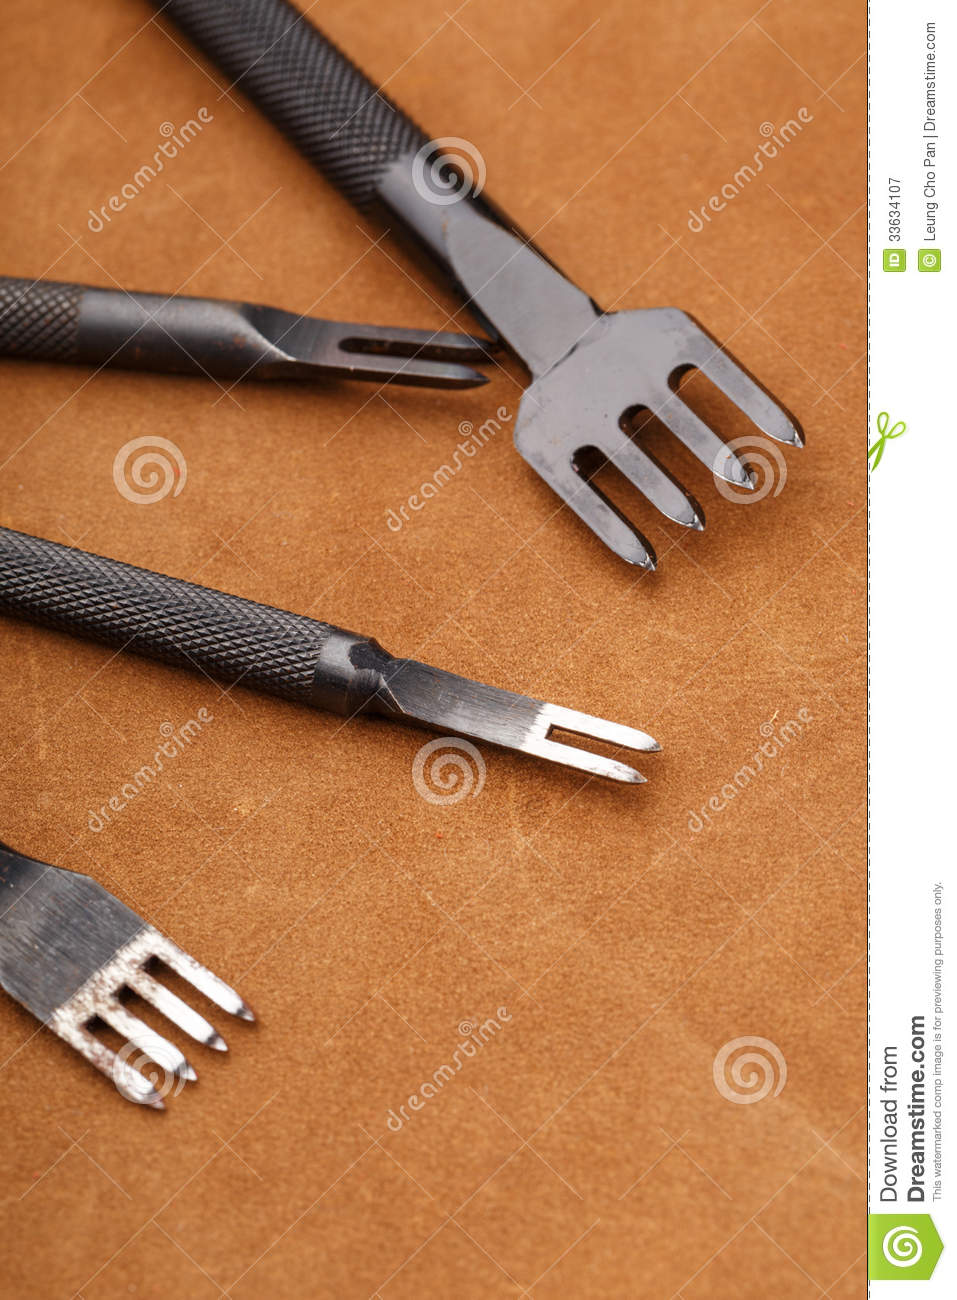 Homemade Leather Craft Tool Royalty Free Stock Photography   Image    